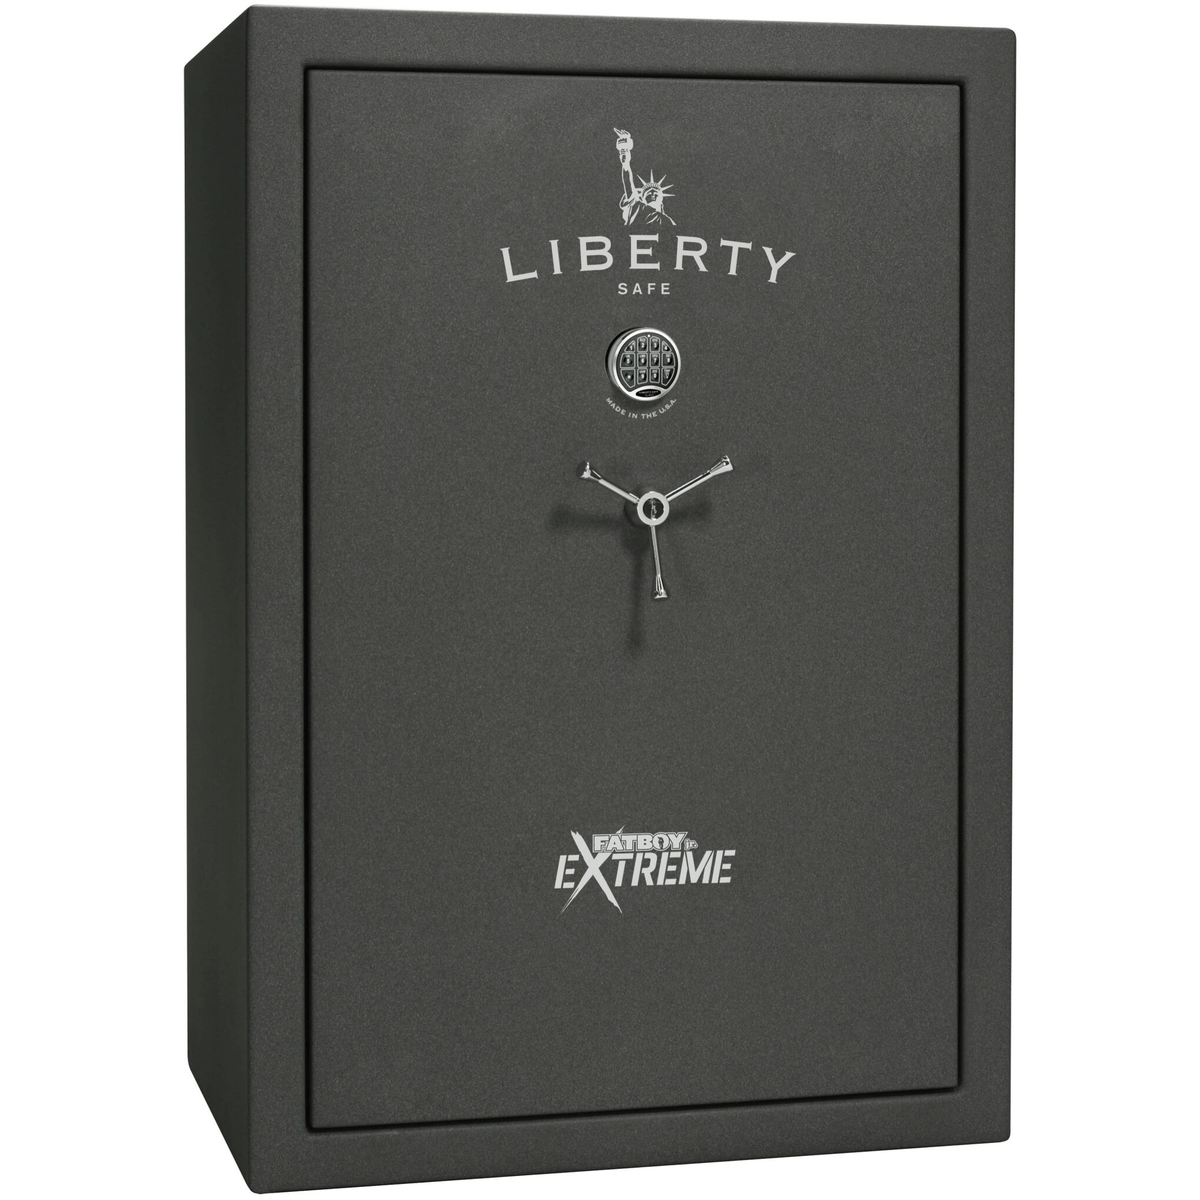 Fatboy jr. Series | level 4 security | 75 minute fire protection  - open case - MODLOCK